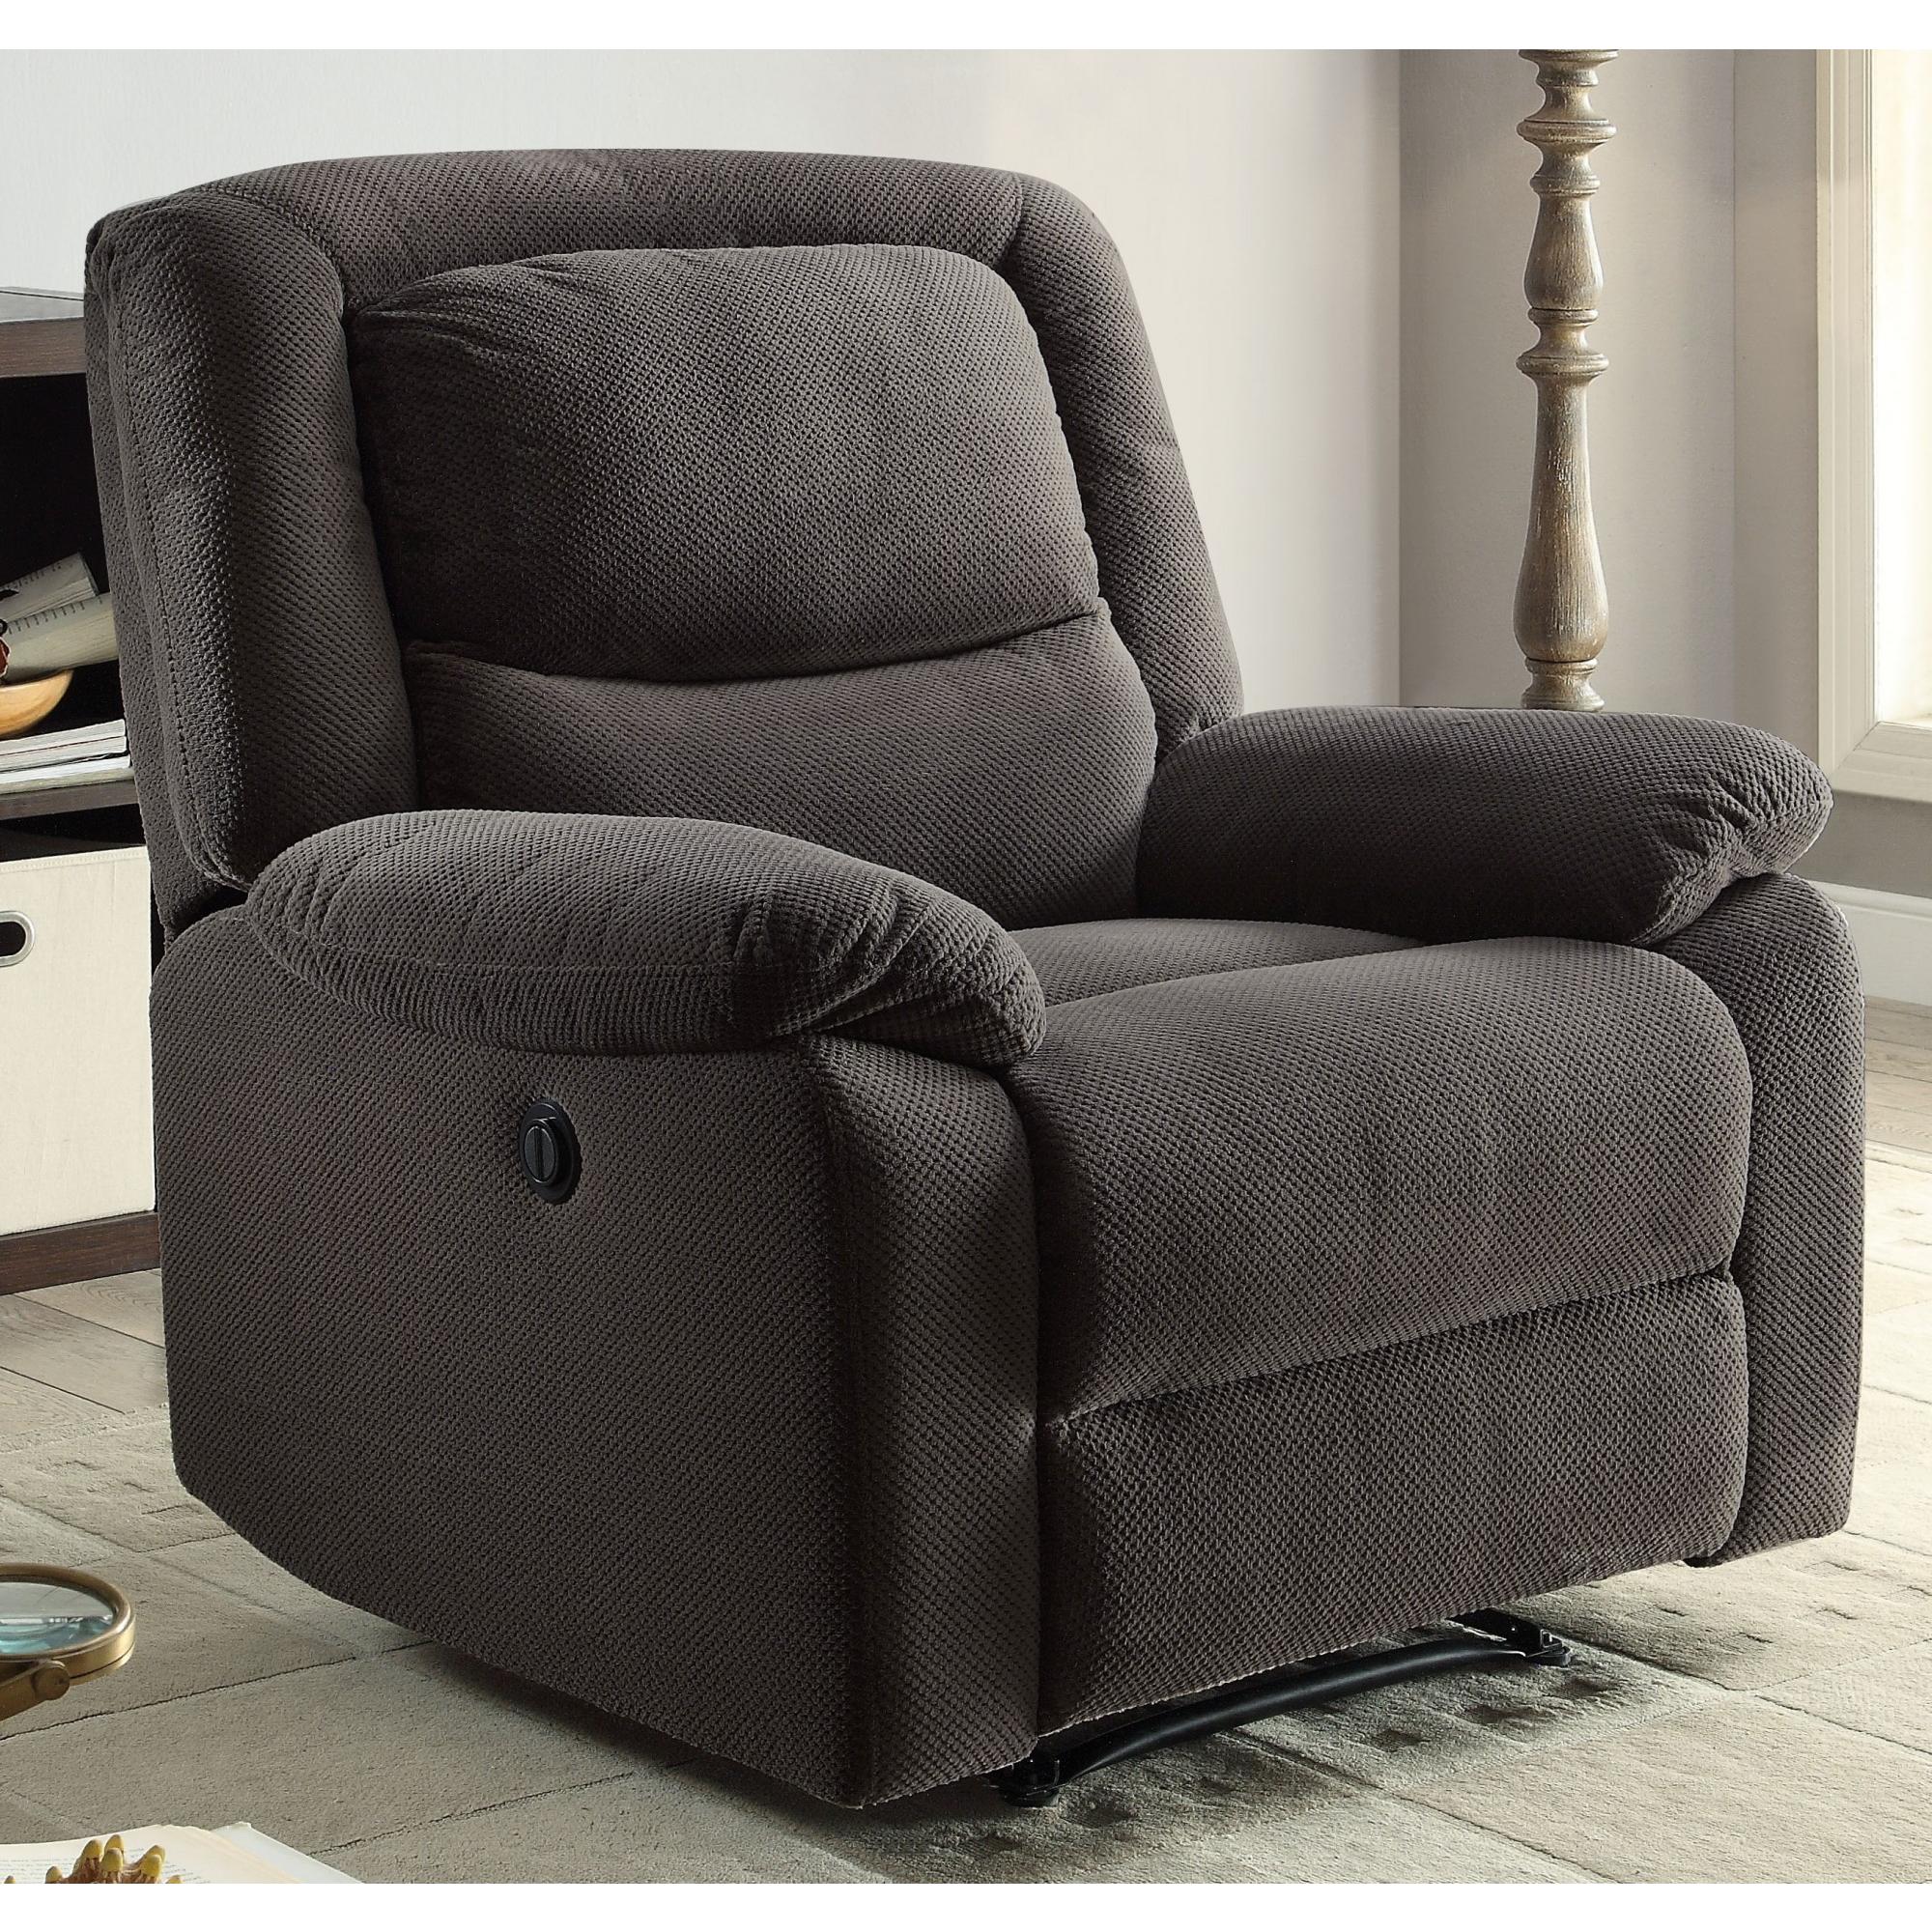 Serta Push-Button Power Recliner with Deep Body Cushions, Ultra Comfortable  Reclining Chair, Multiple Colors - Traveller Location